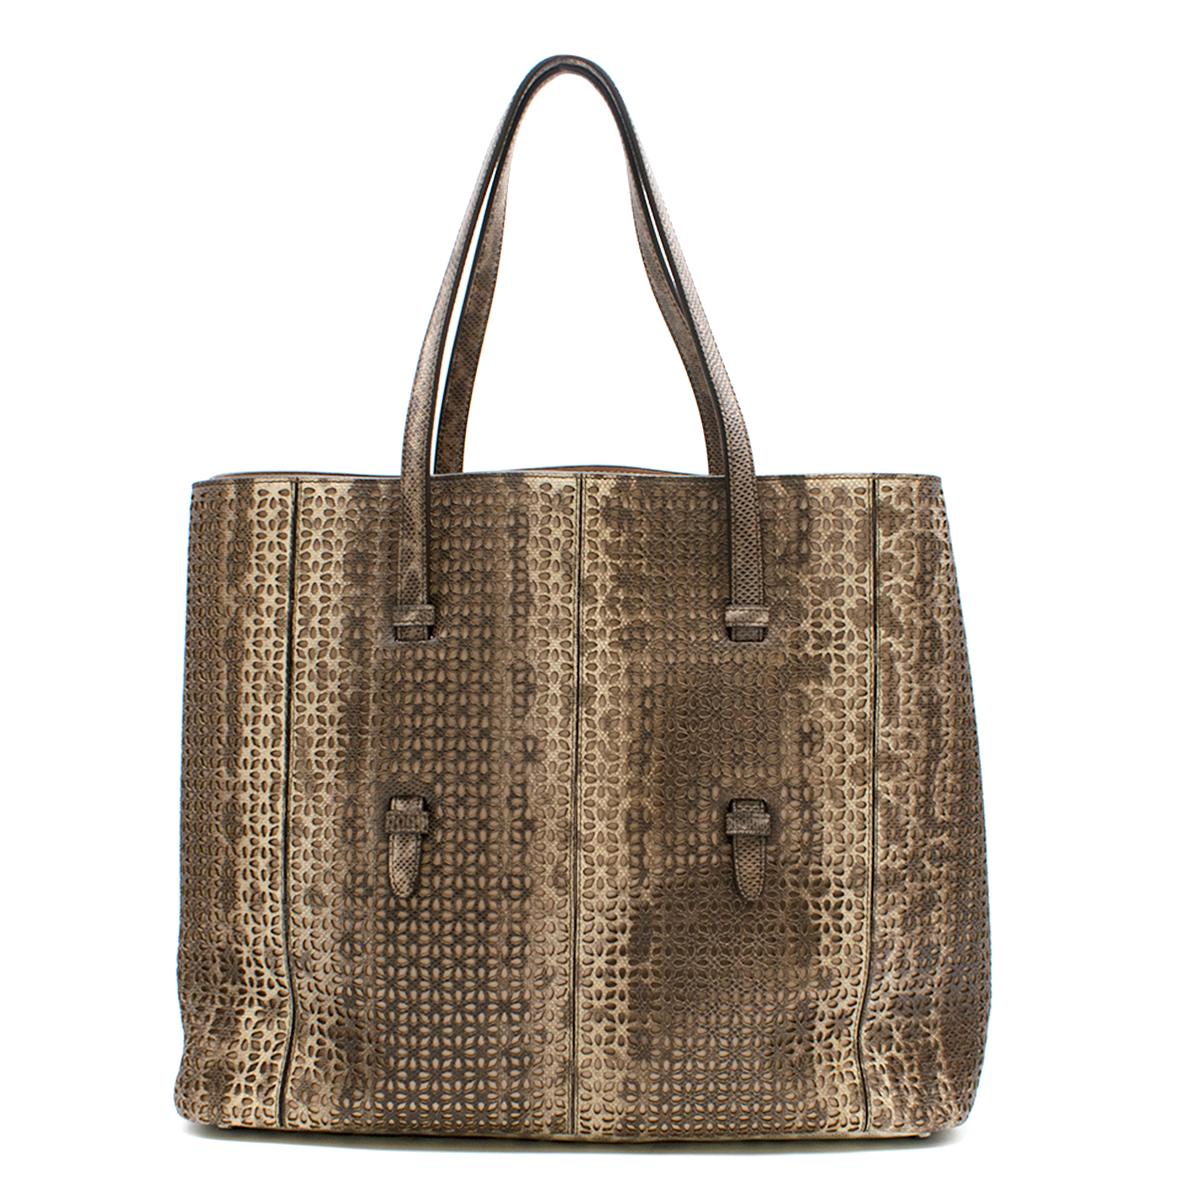 Alaia Watersnake Skin Tote Bag 

- Watersnake Skin Tote Bag 
- Laser Cut perforated 
- Beige leather lining 
- Silver toned feet 
- Internal leather pouch and mirror attached 
- This item comes with a dust bag. 
- Water Snakeskin

Please note, these